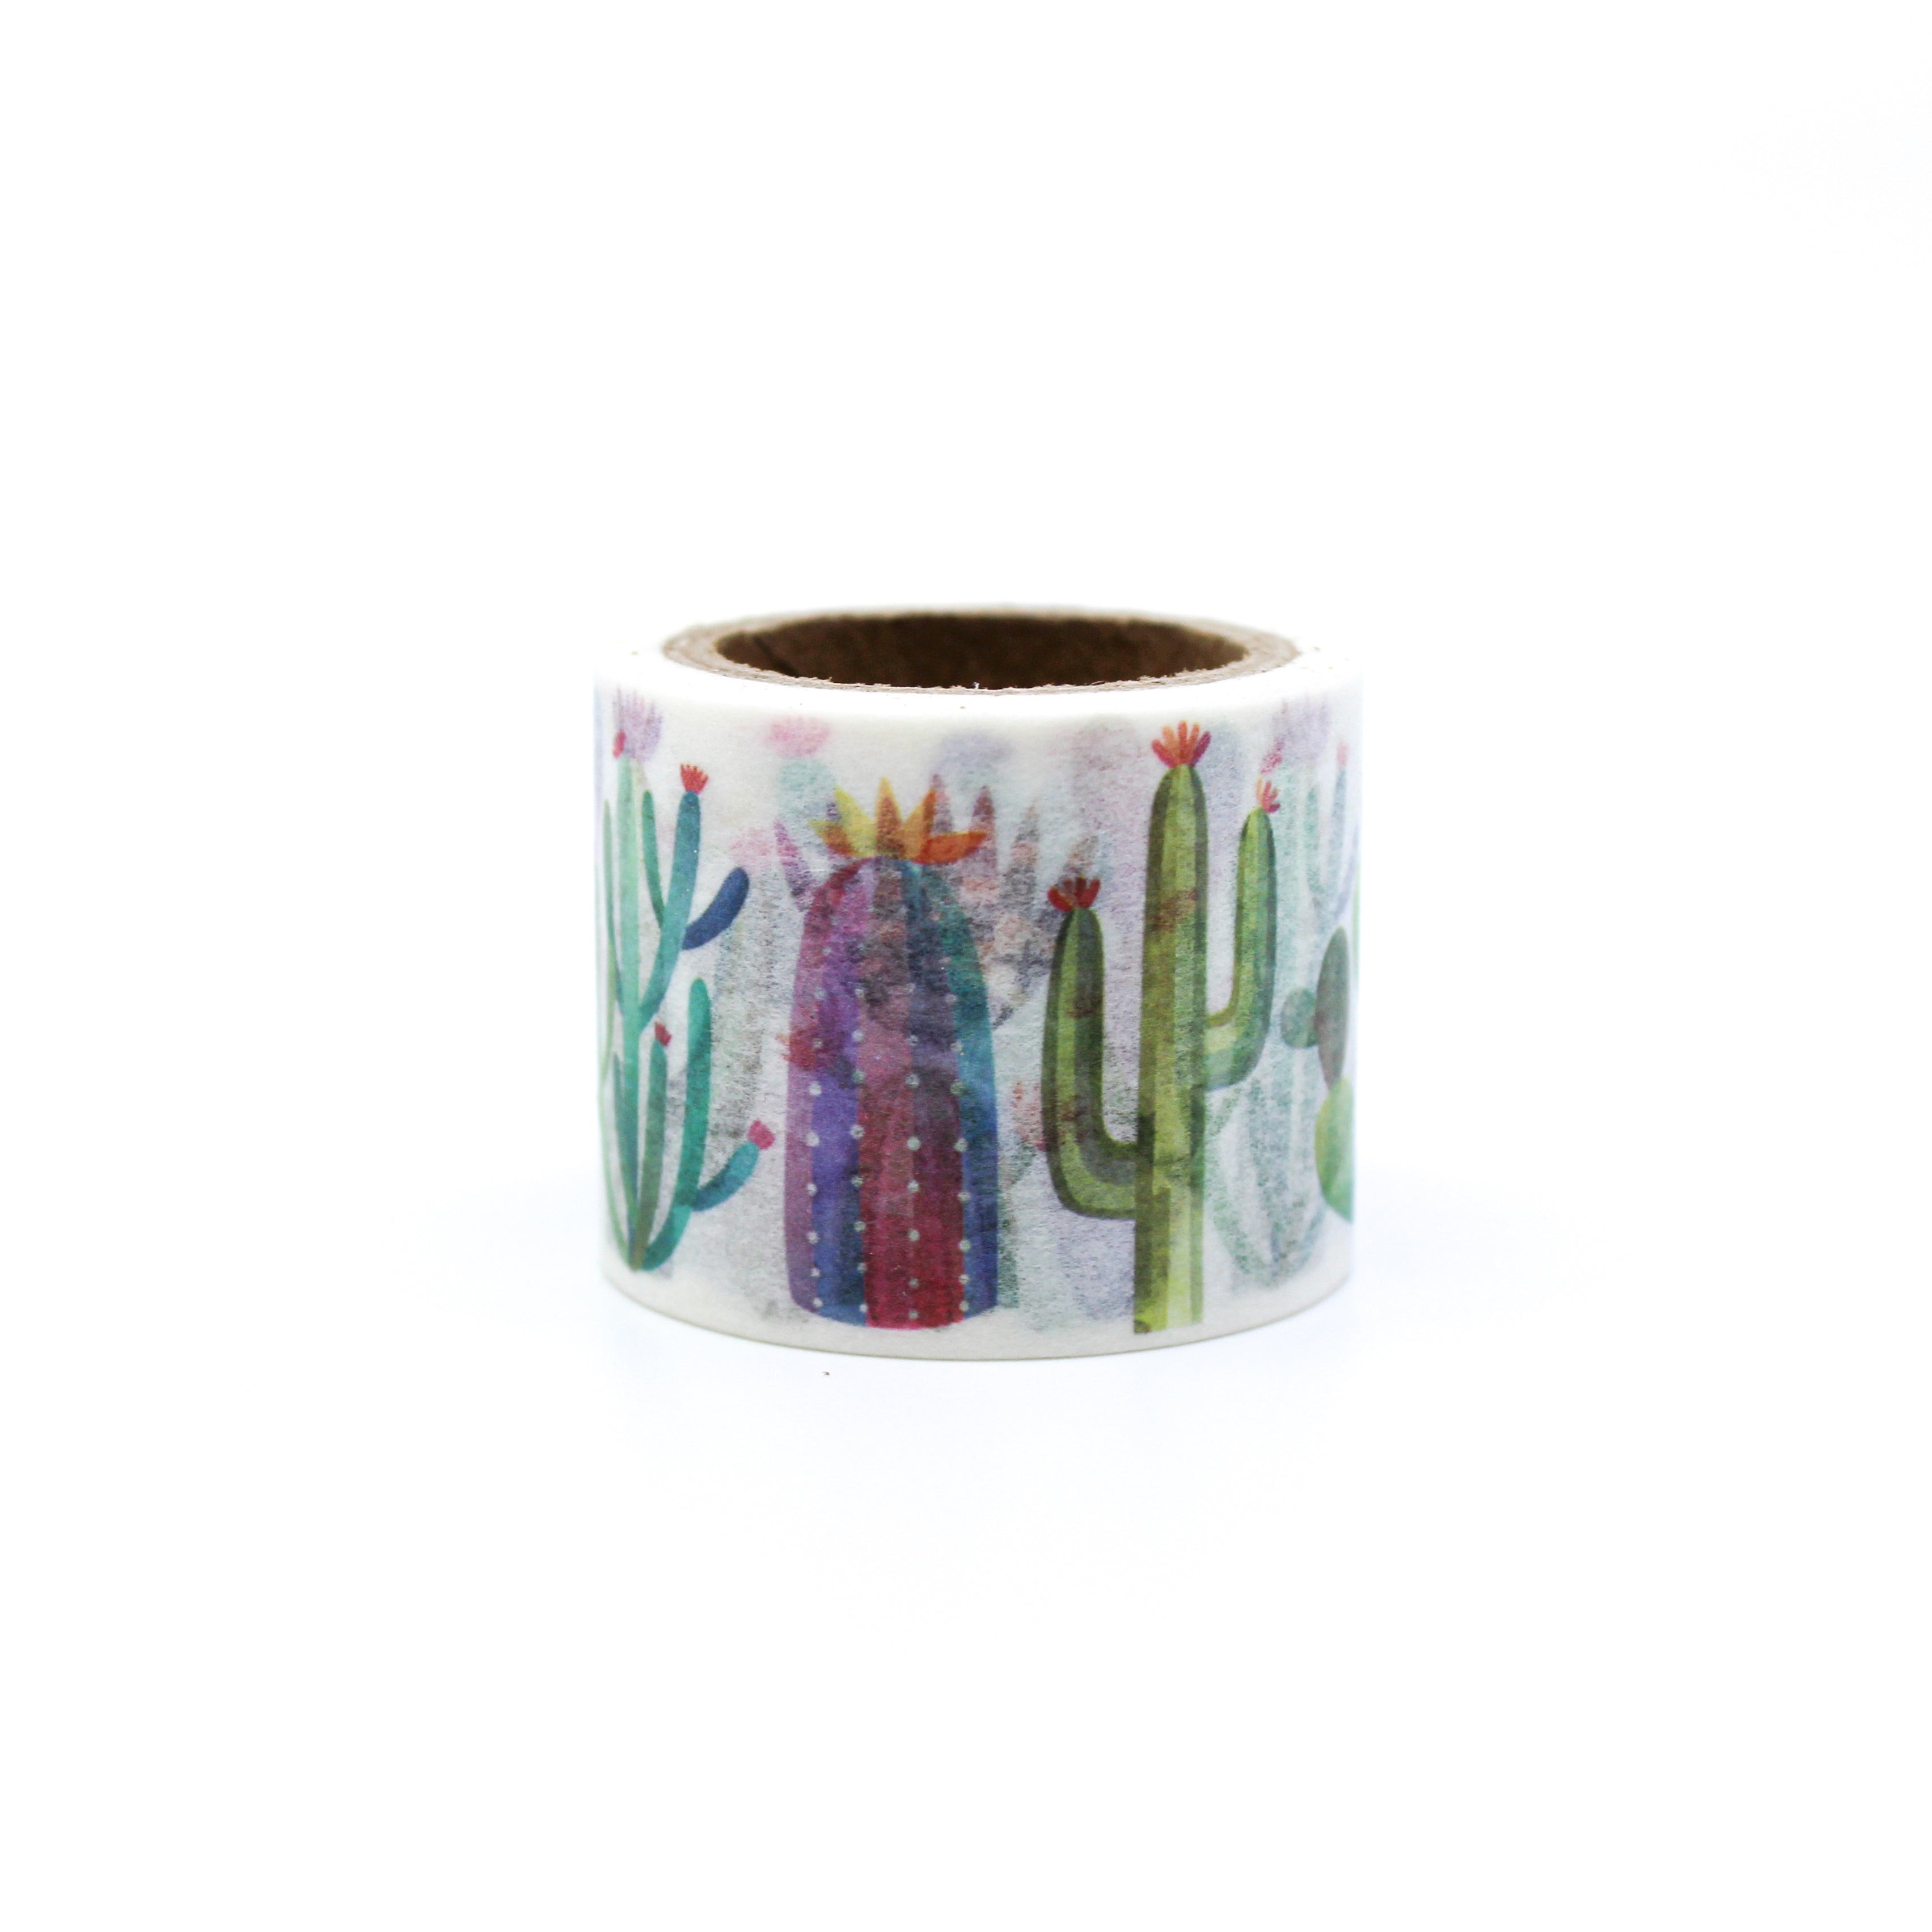 This is a cute collection of desert plants pattern washi tape from BBB Supplies Craft Shop